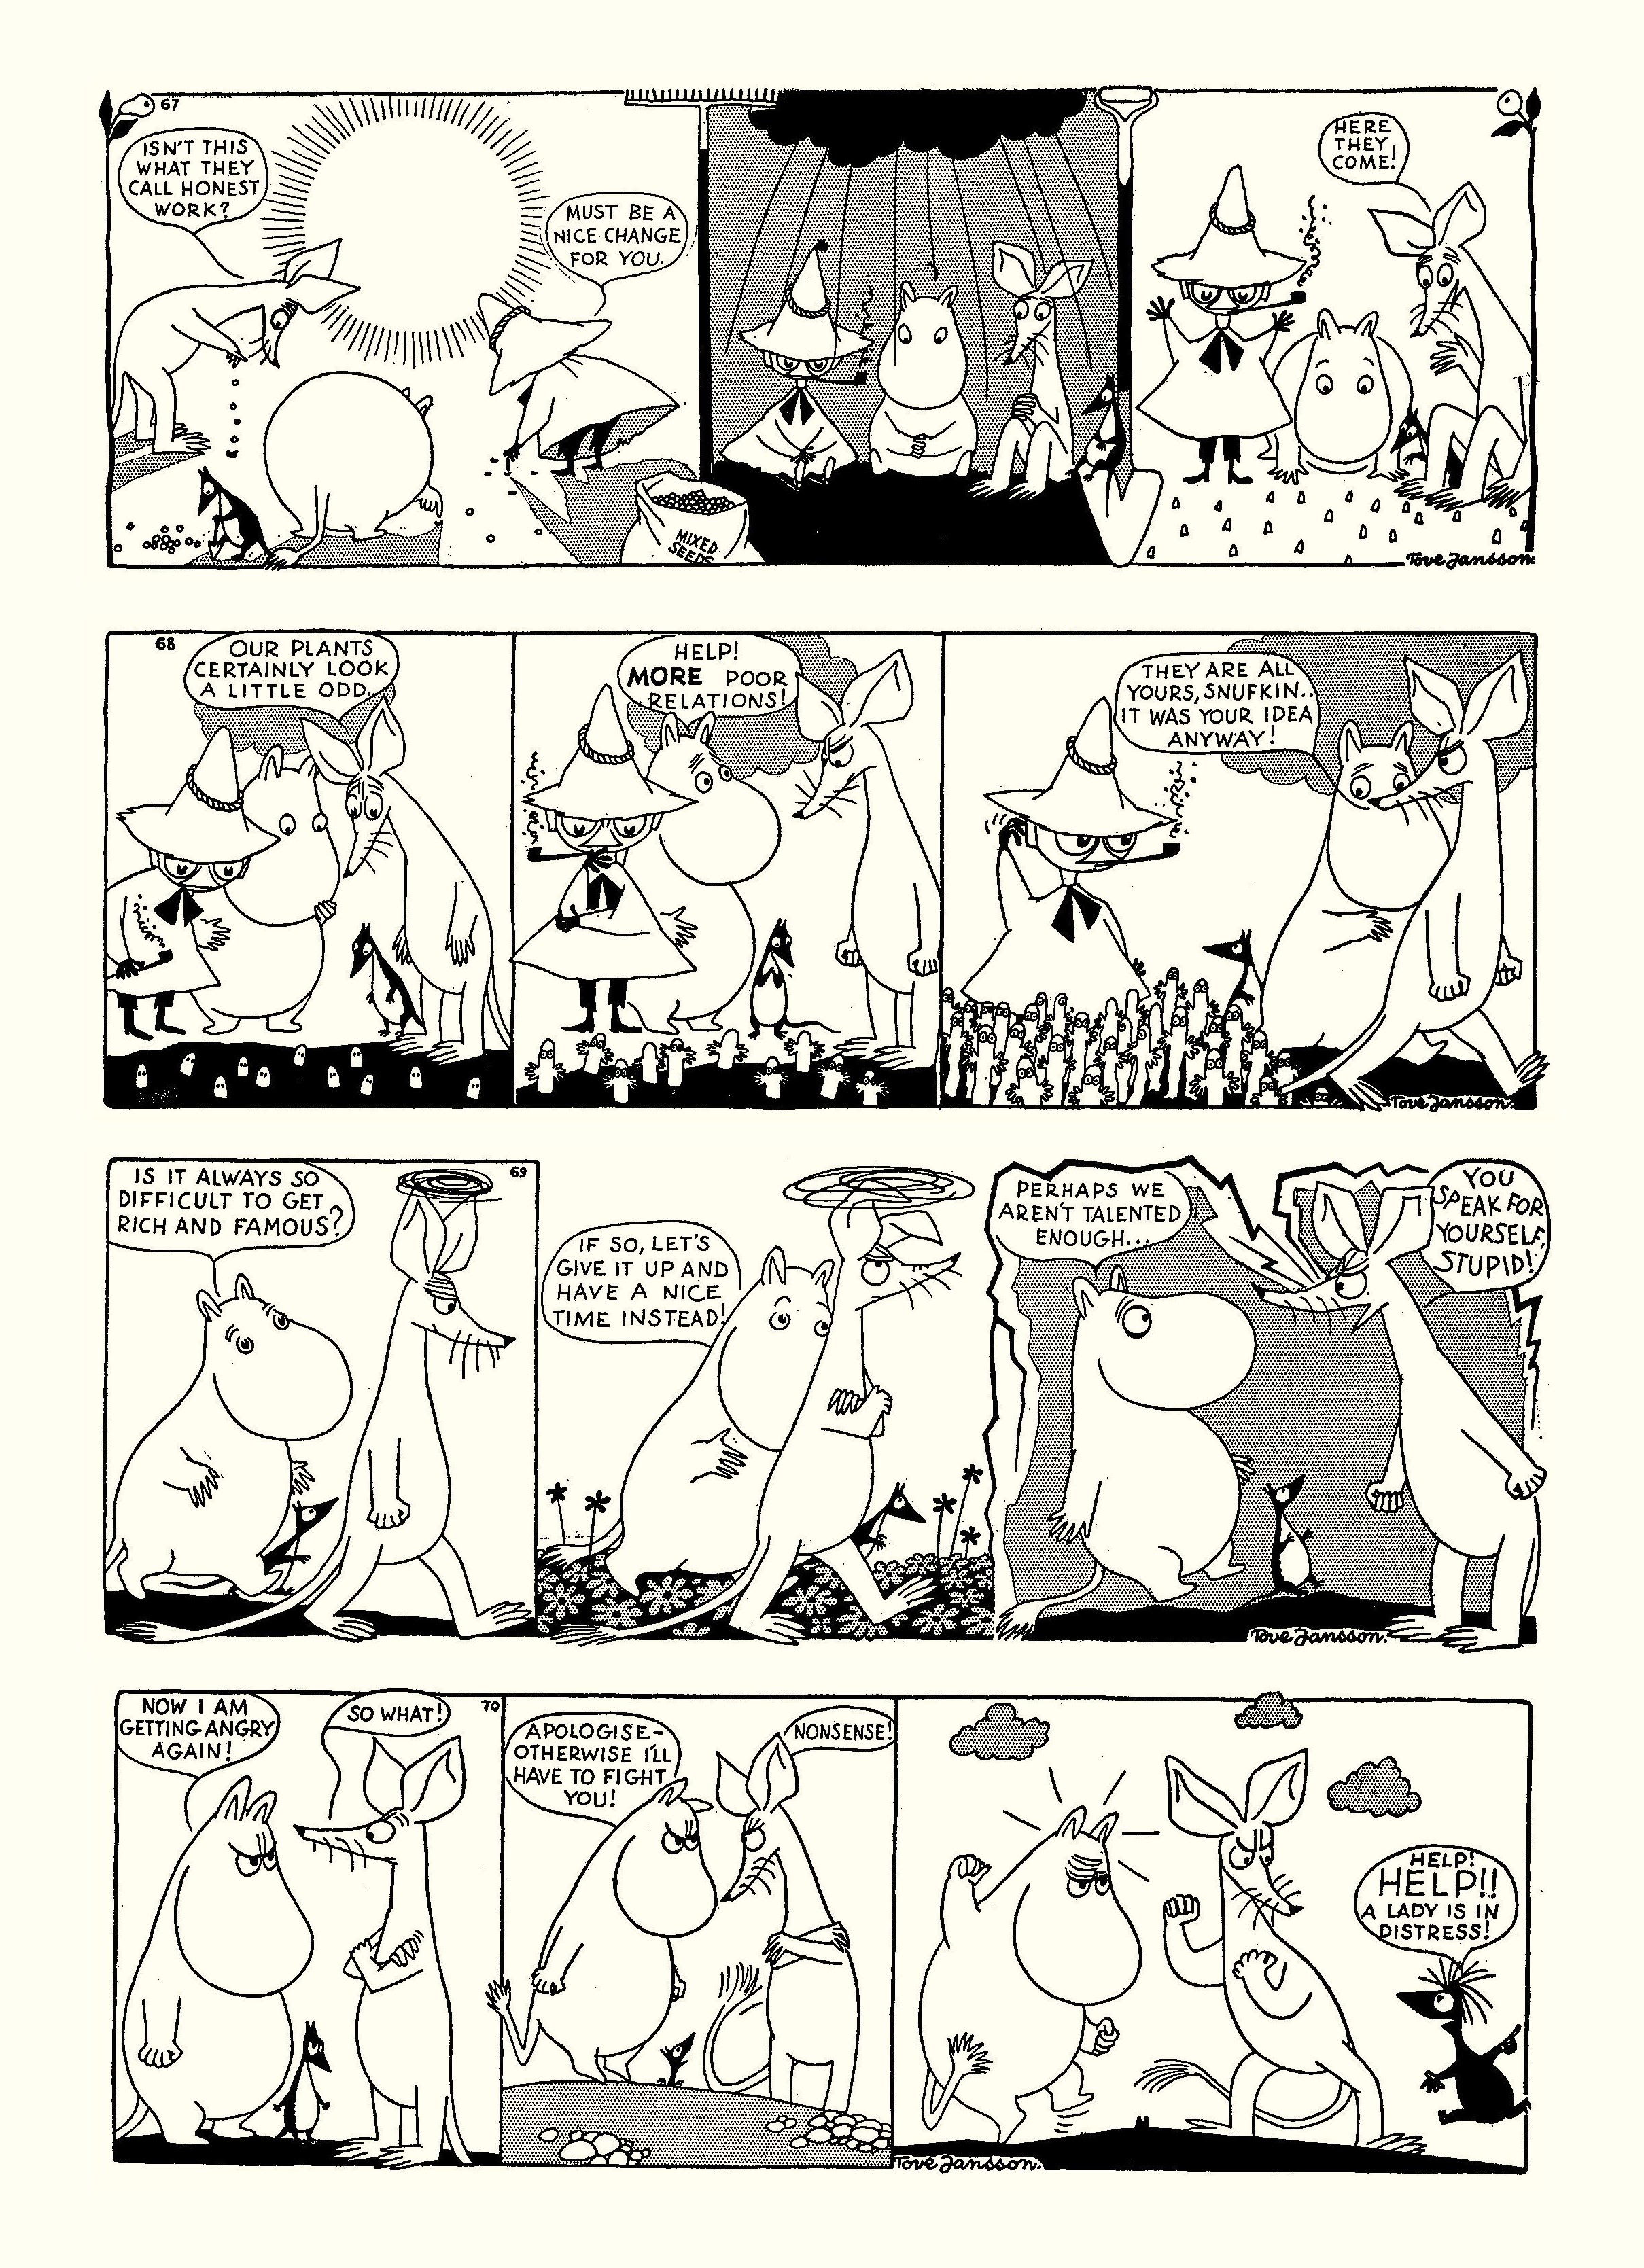 Read online Moomin: The Complete Tove Jansson Comic Strip comic -  Issue # TPB 1 - 23